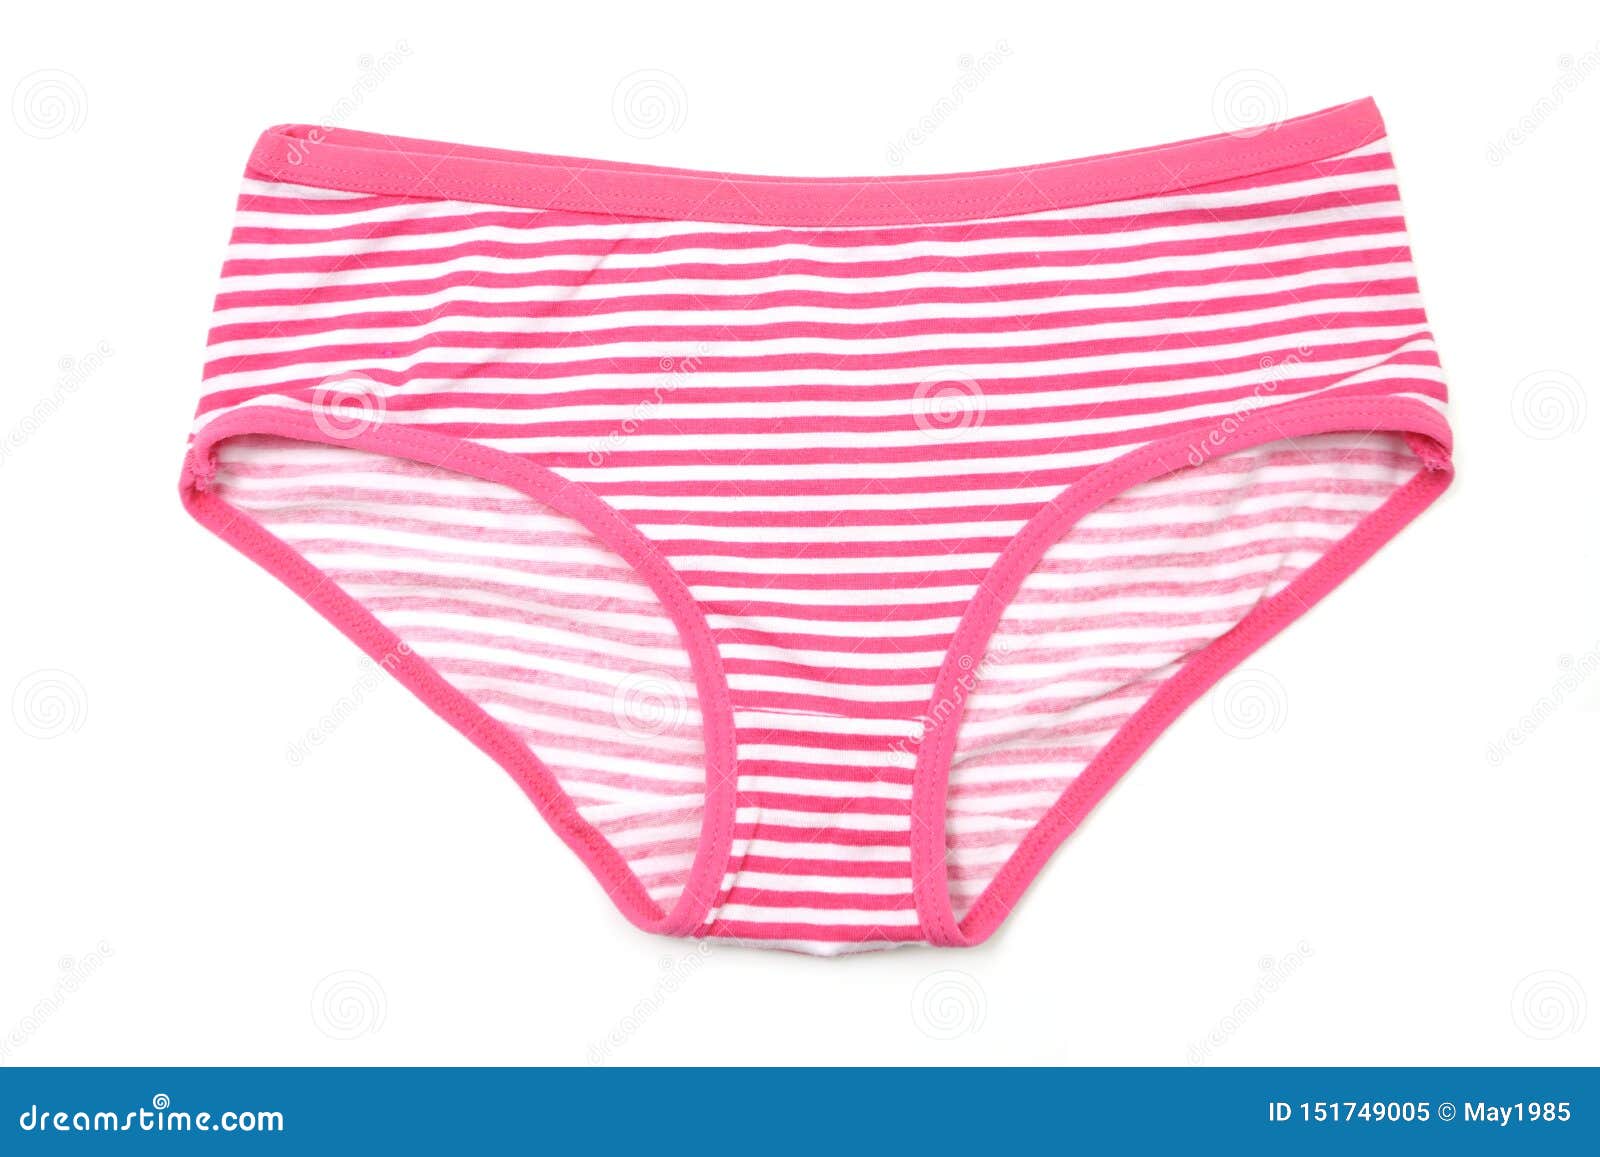 Pink Stripe Panty Isolated On White Background Stock Image Image Of Beauty Cute 151749005